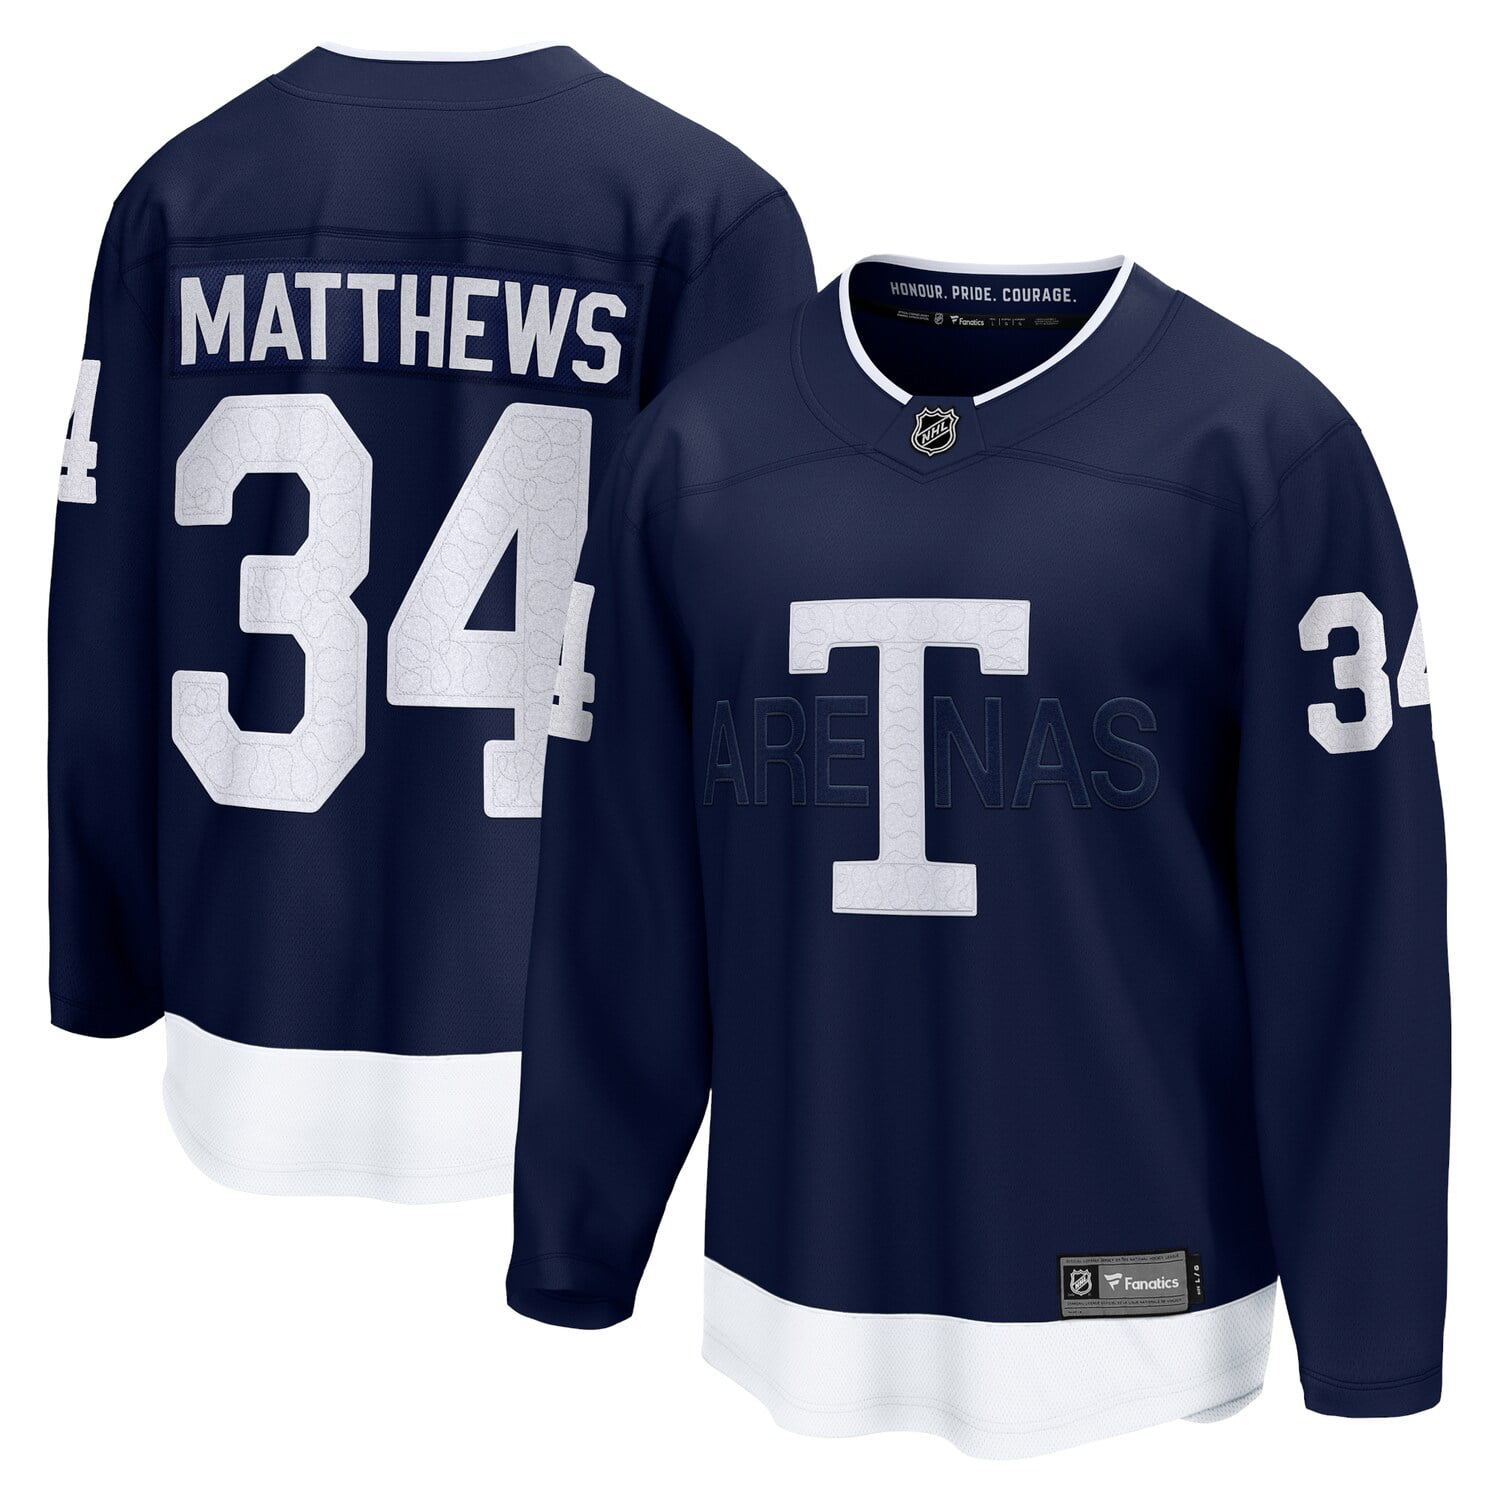 Toronto Maple Leafs: Auston Matthews delivers another classic with GQ